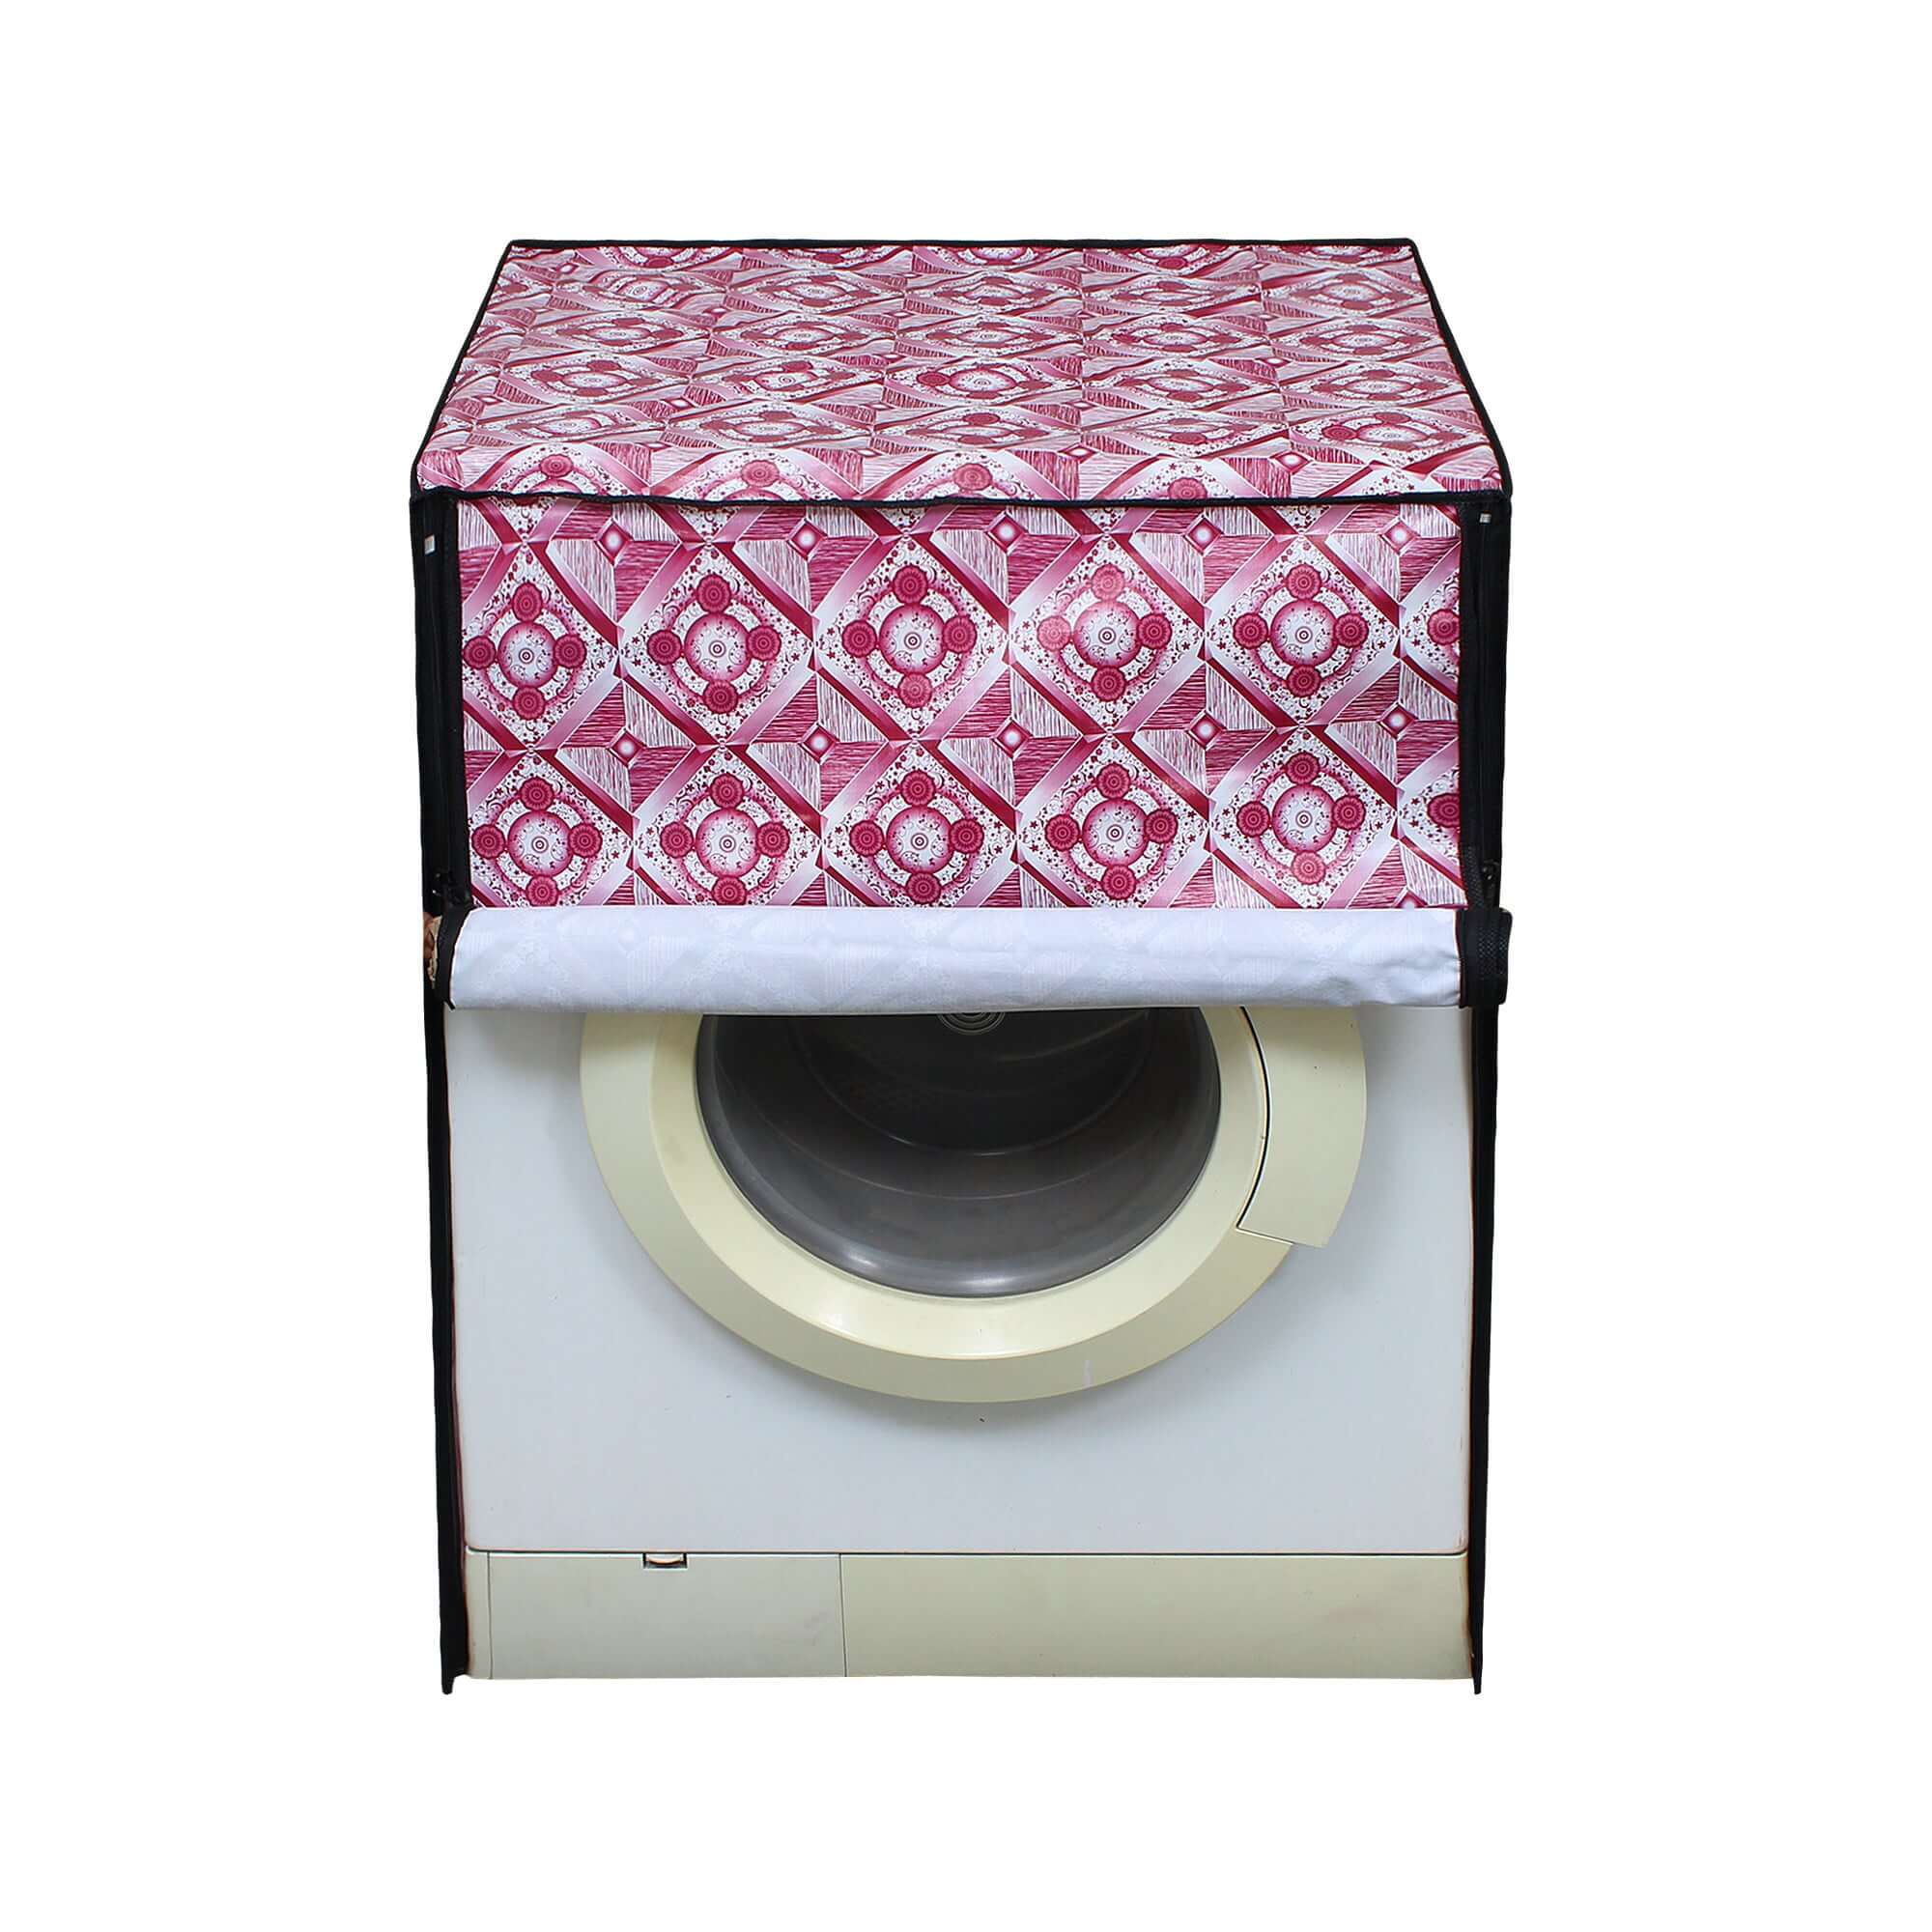 Fully Automatic Front Load Washing Machine Cover, SA55 - Dream Care Furnishings Private Limited